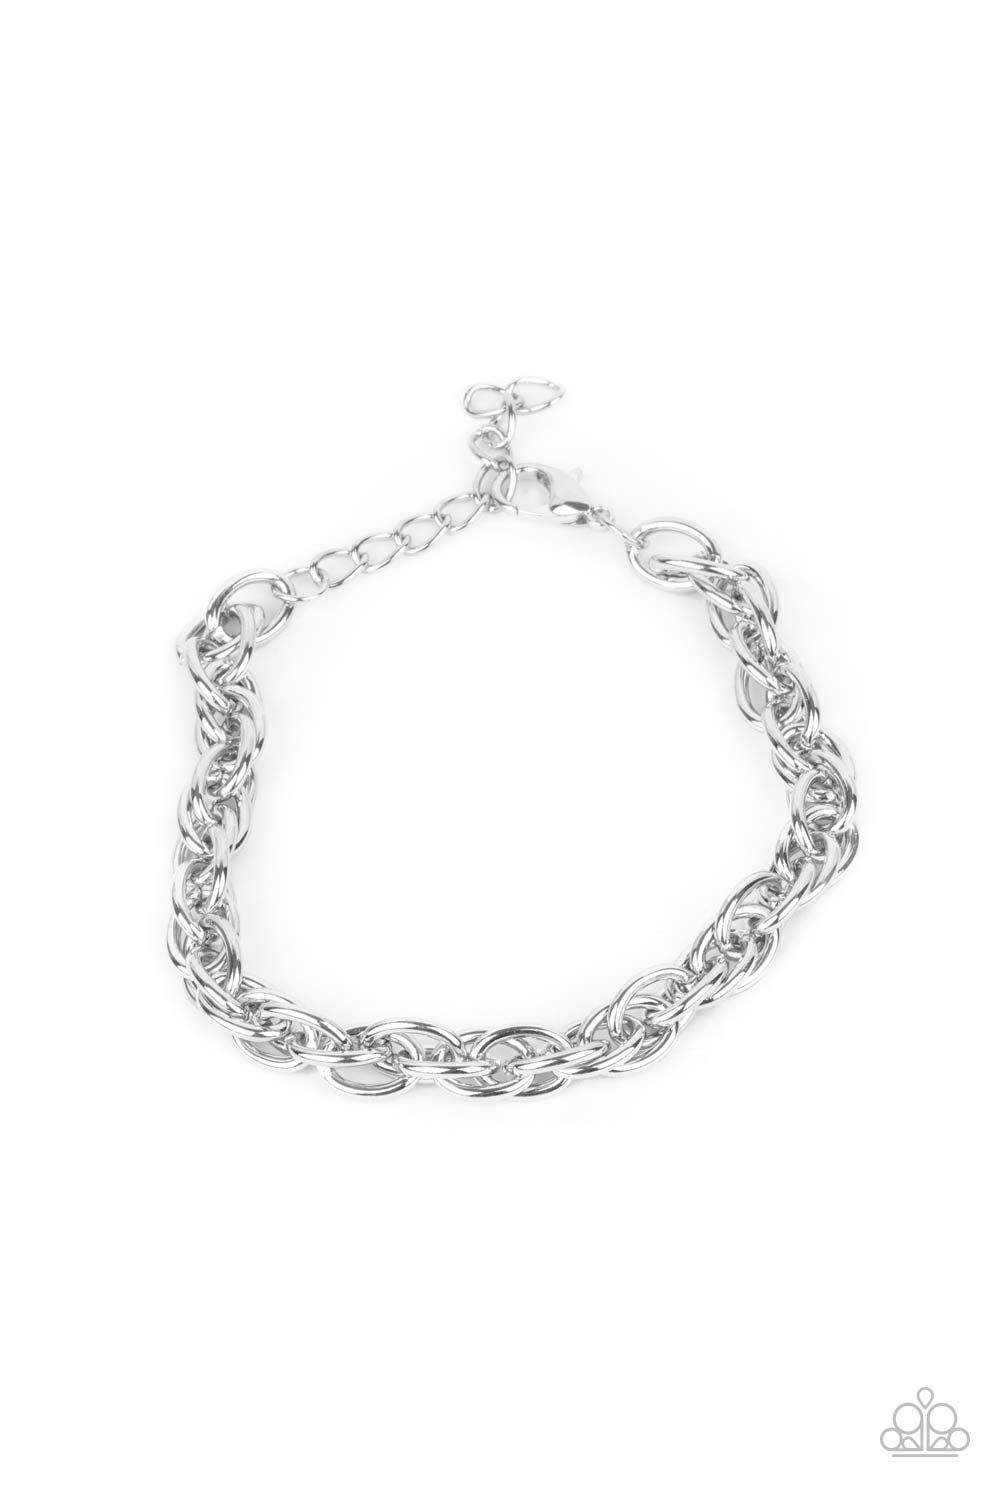 Executive Exclusive Silver Urban Bracelet - Paparazzi Accessories. Double linked silver ovals spin into a bold silver chain around the wrist, creating an intense industrial display. Features an adjustable clasp closure.  All Paparazzi Accessories are lead free and nickel free!  Sold as one individual bracelet.  Get The Complete Look! Necklace: "Extra Entrepreneur - Silver" (Sold Separately)